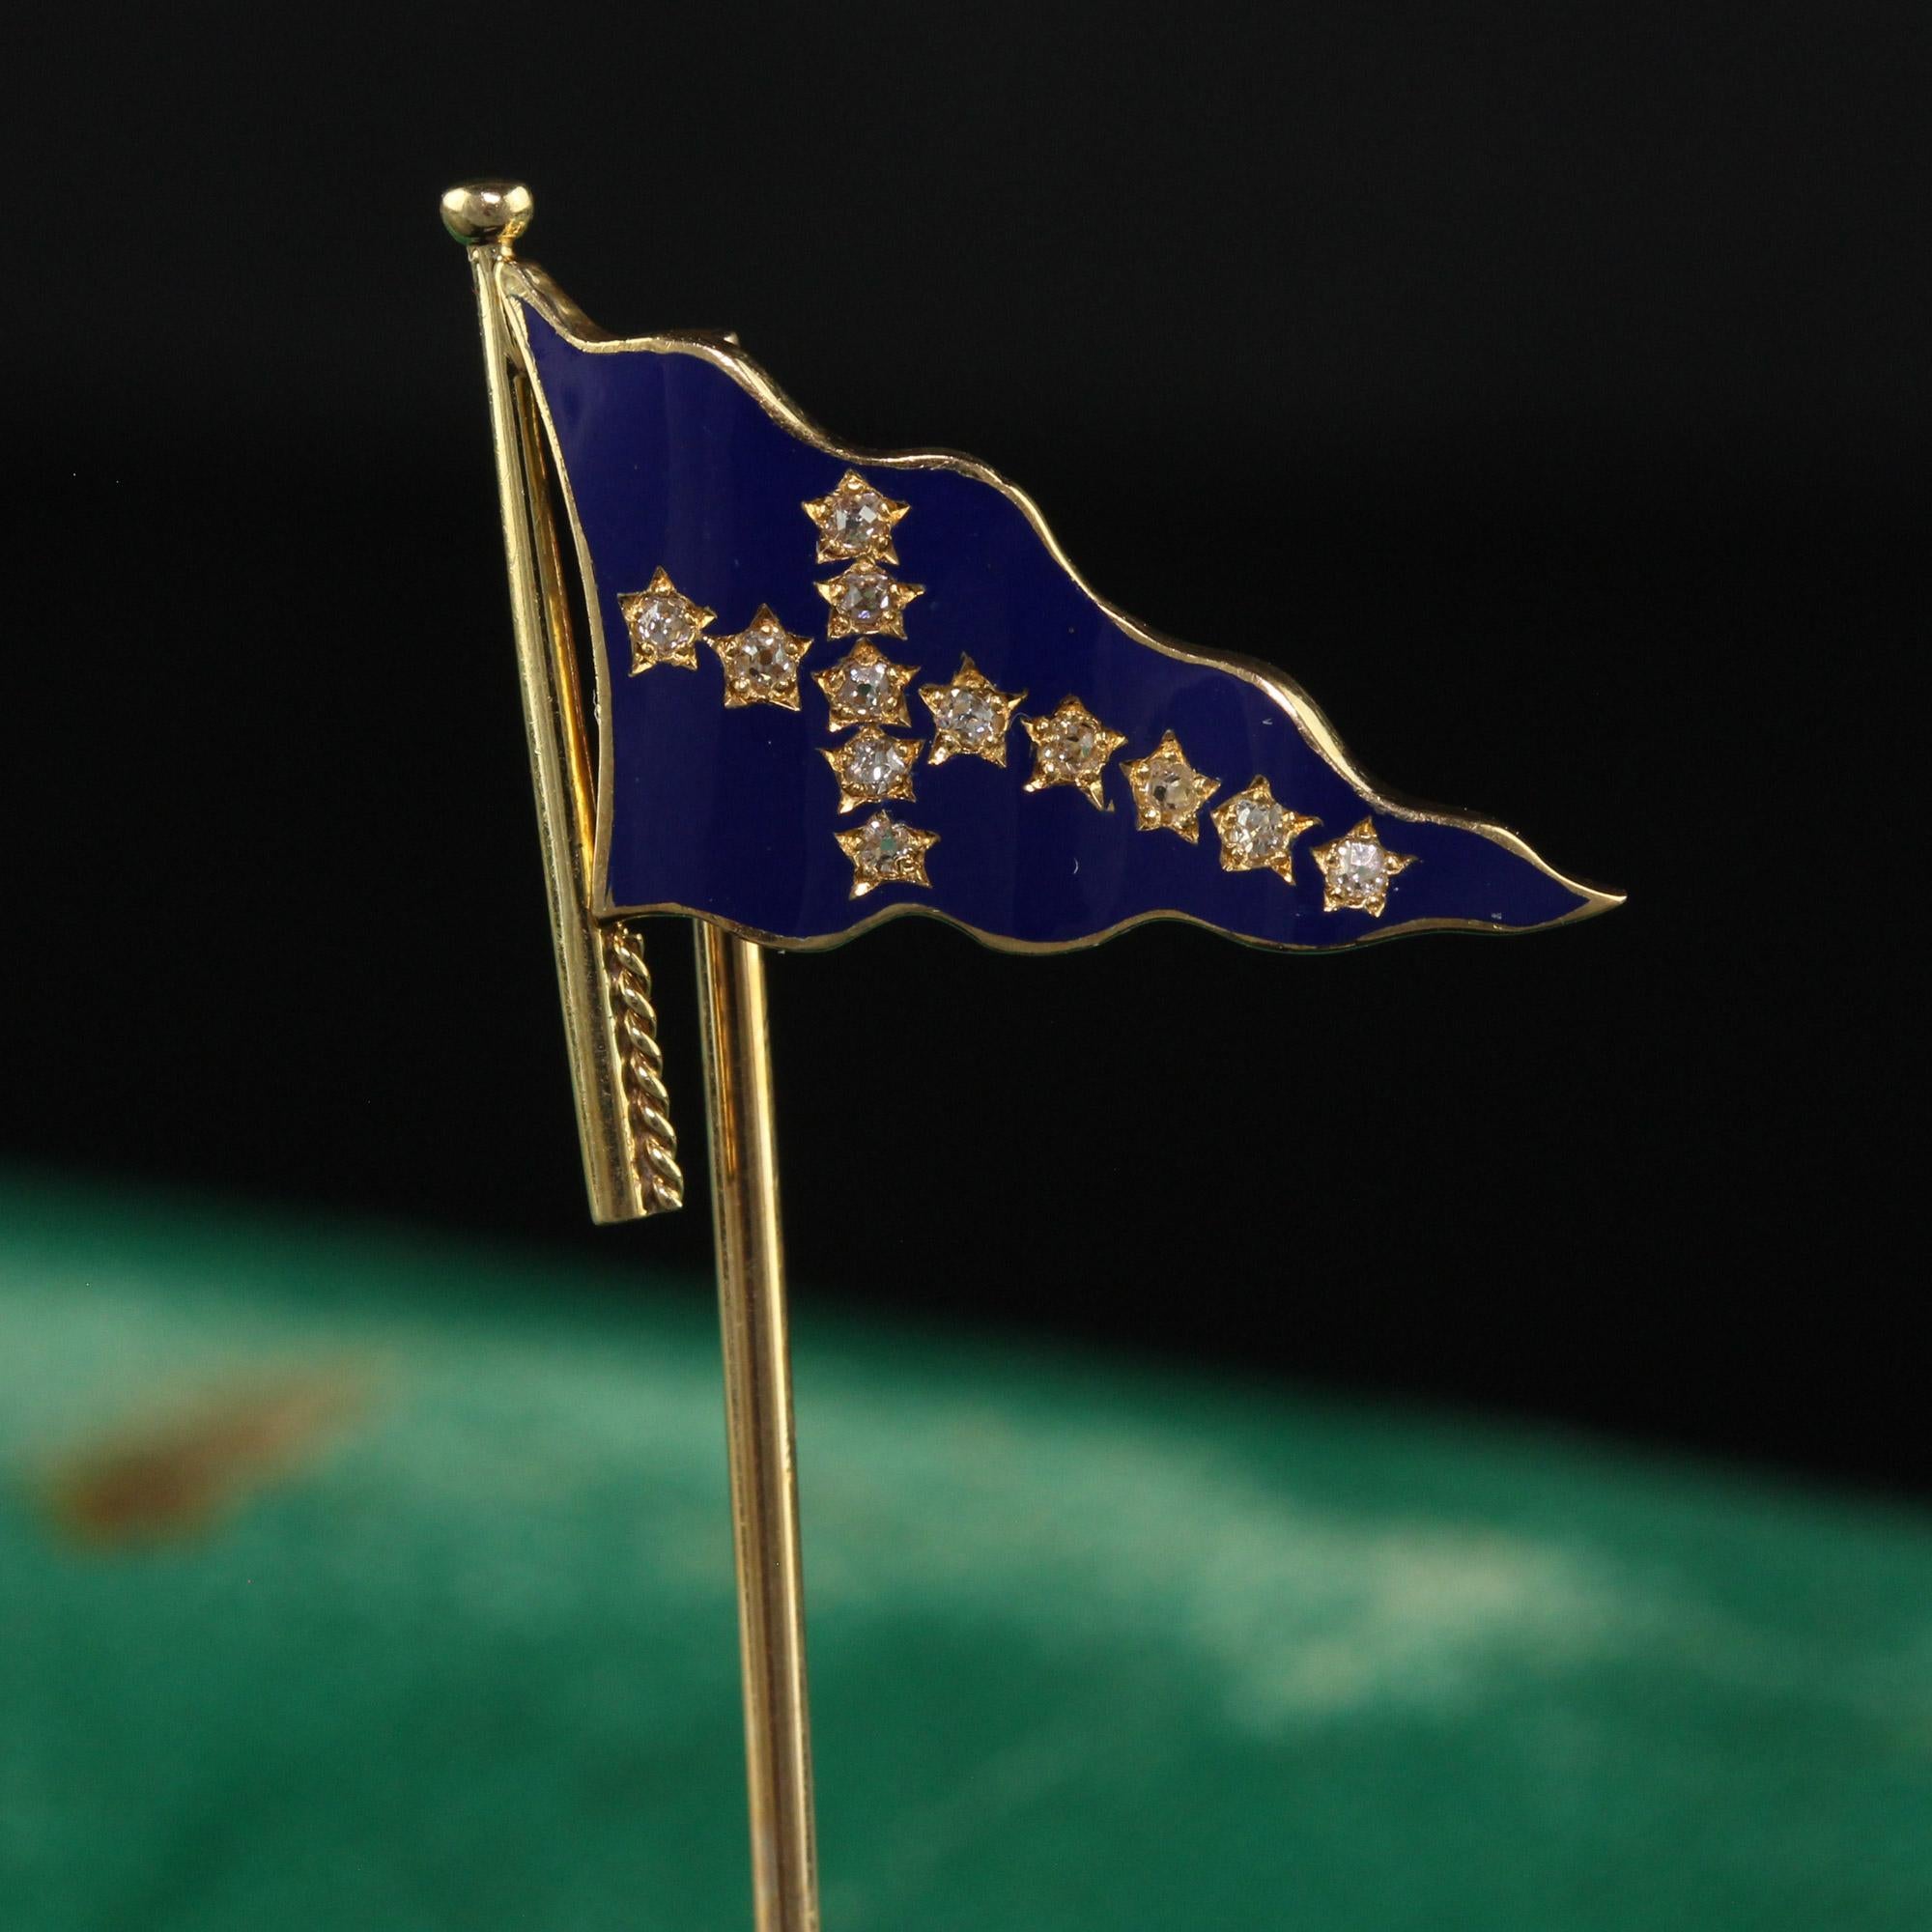 Beautiful Antique Art Deco J.E Caldwell Blue Enamel Flag Stick Pin. This gorgeous Caldwell stick pin is crafted in 18K Yellow Gold. The pin features a flag that has blue enamel on it with old cut diamonds forming a sideways cross. We believe this